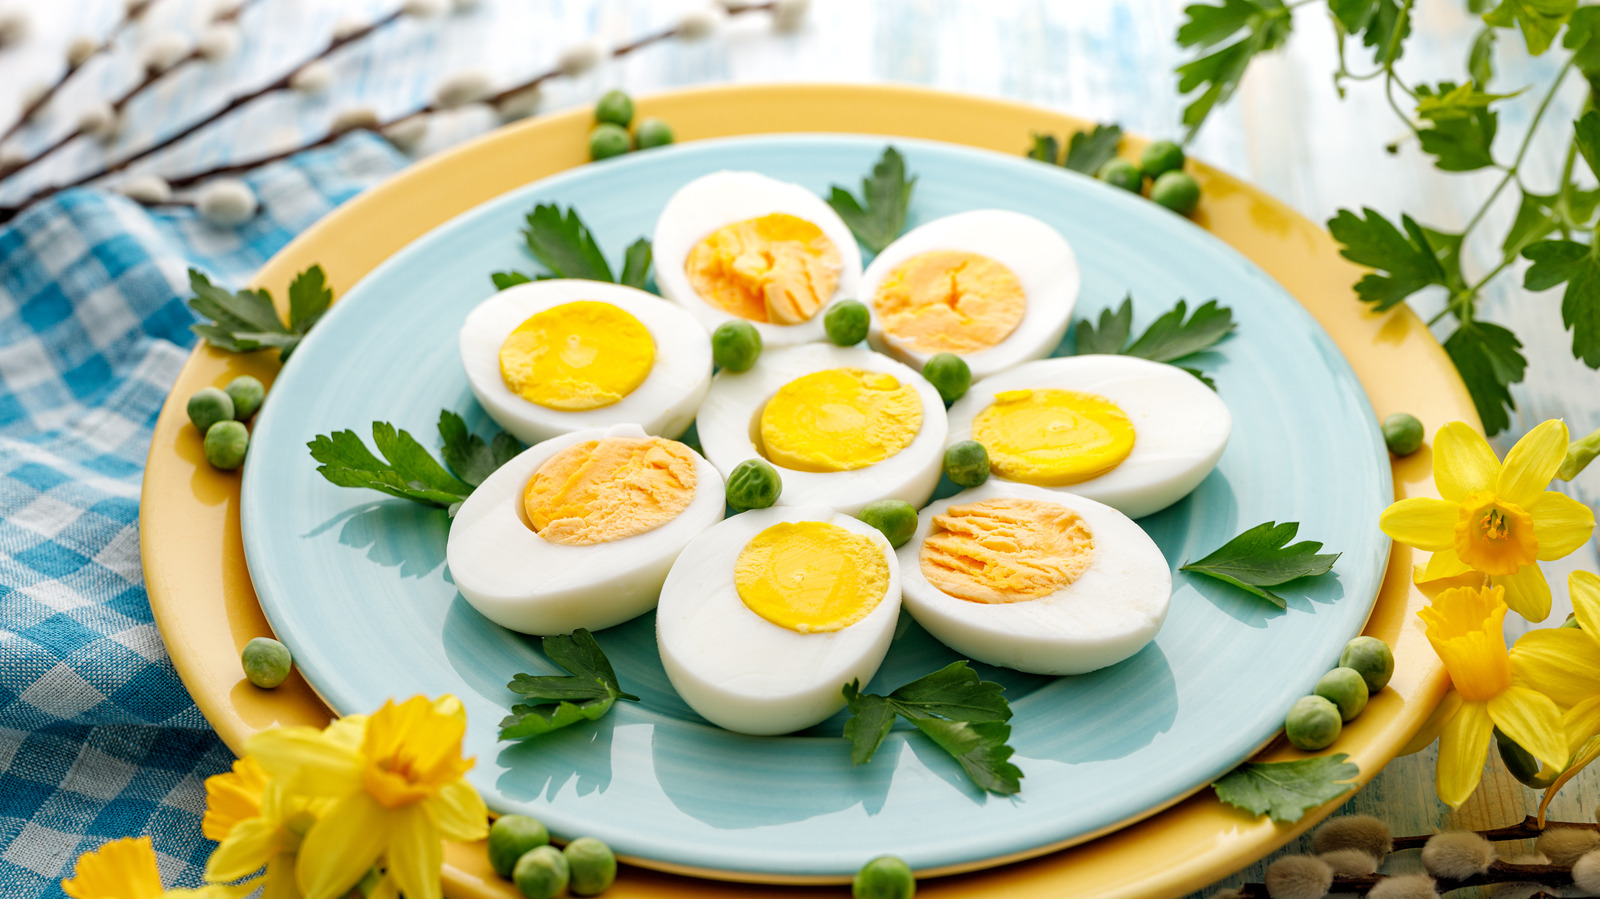 Halves,Of,Boiled,Eggs,On,A,Blue,Plate,,Close,Up